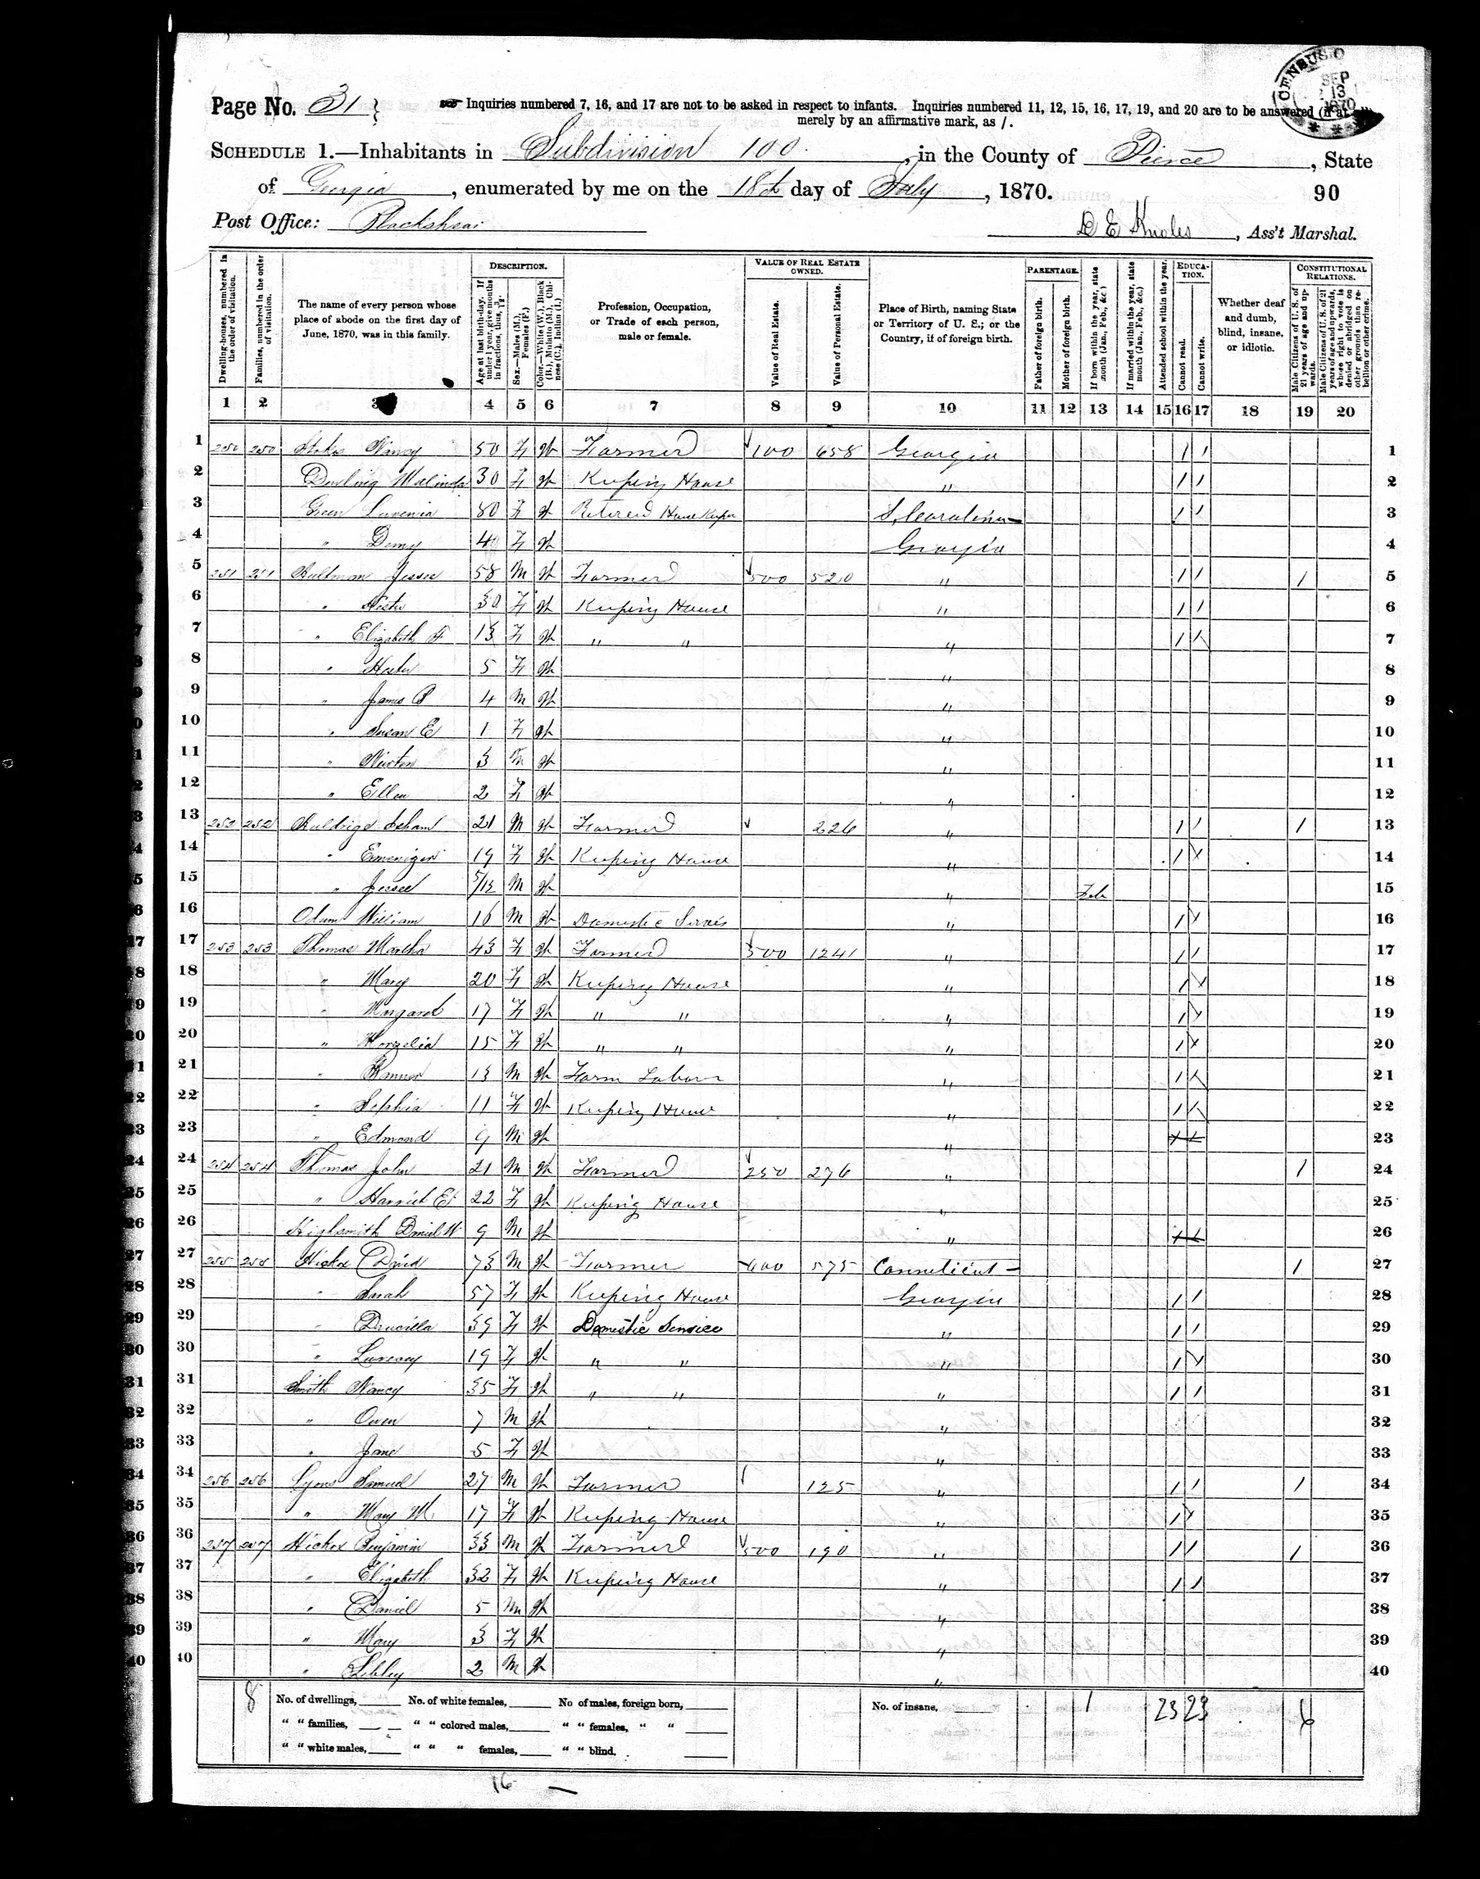 Subjects by Source1870 Federal Census - Georgia, Pierce County - Hickox